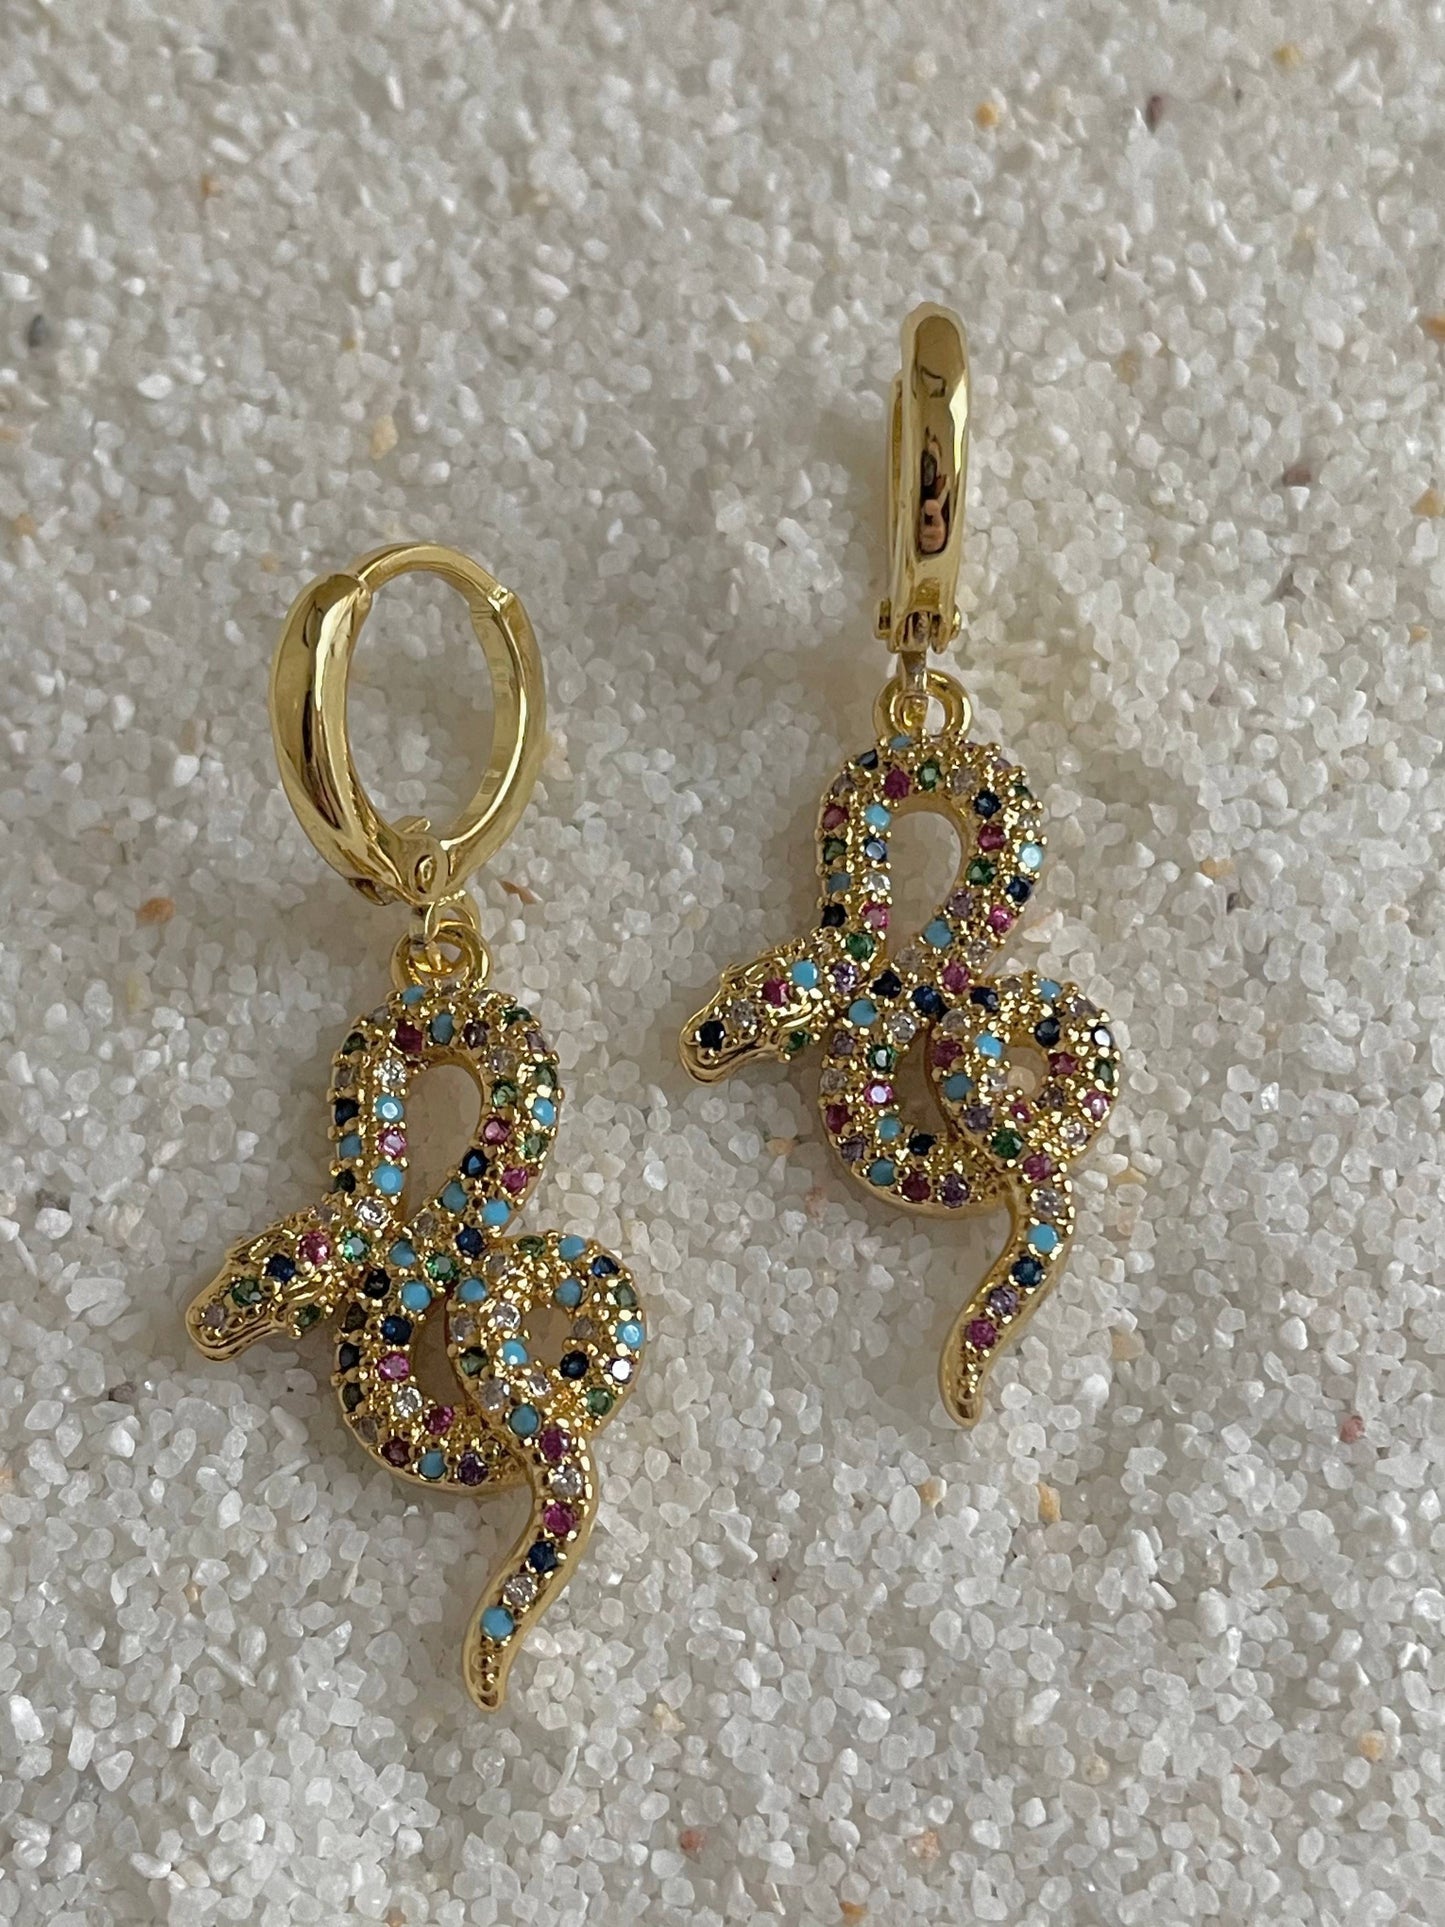 Rainbow Snake Huggies. Gold FIlled Earrings. Gold Jewelry